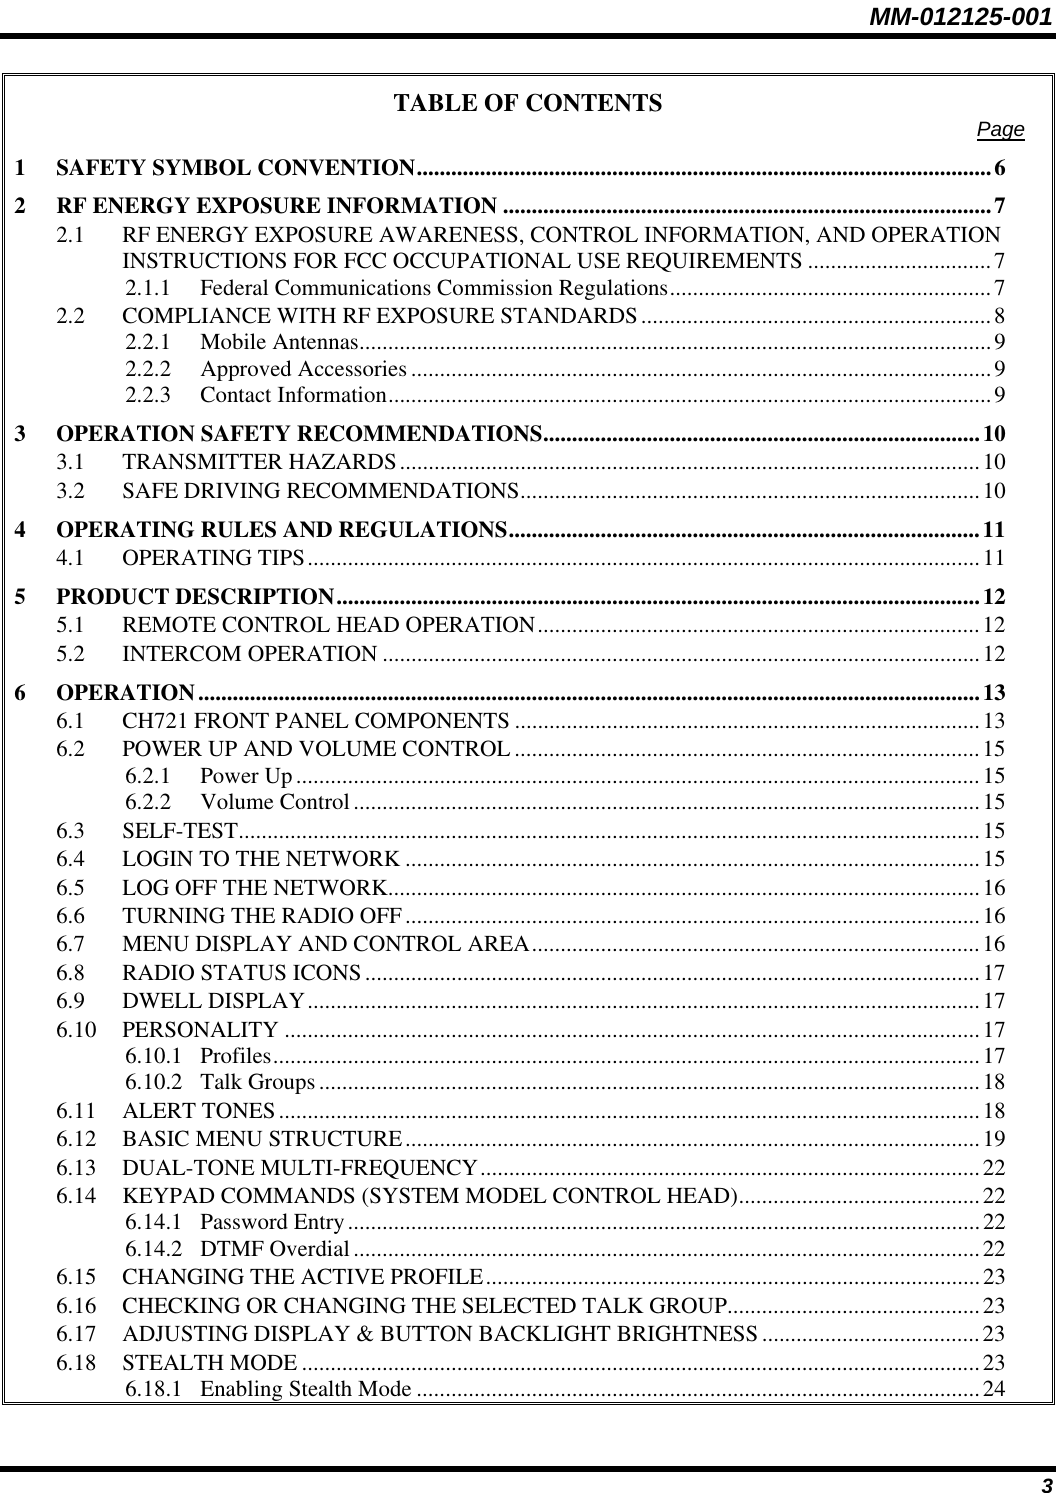 MM-012125-001 TABLE OF CONTENTS  Page 1 SAFETY SYMBOL CONVENTION....................................................................................................6 2 RF ENERGY EXPOSURE INFORMATION .....................................................................................7 2.1 RF ENERGY EXPOSURE AWARENESS, CONTROL INFORMATION, AND OPERATION INSTRUCTIONS FOR FCC OCCUPATIONAL USE REQUIREMENTS ................................7 2.1.1 Federal Communications Commission Regulations........................................................7 2.2 COMPLIANCE WITH RF EXPOSURE STANDARDS.............................................................8 2.2.1 Mobile Antennas..............................................................................................................9 2.2.2 Approved Accessories .....................................................................................................9 2.2.3 Contact Information.........................................................................................................9 3 OPERATION SAFETY RECOMMENDATIONS............................................................................10 3.1 TRANSMITTER HAZARDS.....................................................................................................10 3.2 SAFE DRIVING RECOMMENDATIONS................................................................................10 4 OPERATING RULES AND REGULATIONS..................................................................................11 4.1 OPERATING TIPS.....................................................................................................................11 5 PRODUCT DESCRIPTION................................................................................................................12 5.1 REMOTE CONTROL HEAD OPERATION.............................................................................12 5.2 INTERCOM OPERATION ........................................................................................................12 6 OPERATION........................................................................................................................................13 6.1 CH721 FRONT PANEL COMPONENTS .................................................................................13 6.2 POWER UP AND VOLUME CONTROL .................................................................................15 6.2.1 Power Up.......................................................................................................................15 6.2.2 Volume Control.............................................................................................................15 6.3 SELF-TEST.................................................................................................................................15 6.4 LOGIN TO THE NETWORK ....................................................................................................15 6.5 LOG OFF THE NETWORK.......................................................................................................16 6.6 TURNING THE RADIO OFF....................................................................................................16 6.7 MENU DISPLAY AND CONTROL AREA..............................................................................16 6.8 RADIO STATUS ICONS...........................................................................................................17 6.9 DWELL DISPLAY.....................................................................................................................17 6.10 PERSONALITY .........................................................................................................................17 6.10.1 Profiles...........................................................................................................................17 6.10.2 Talk Groups...................................................................................................................18 6.11 ALERT TONES..........................................................................................................................18 6.12 BASIC MENU STRUCTURE....................................................................................................19 6.13 DUAL-TONE MULTI-FREQUENCY.......................................................................................22 6.14 KEYPAD COMMANDS (SYSTEM MODEL CONTROL HEAD)..........................................22 6.14.1 Password Entry..............................................................................................................22 6.14.2 DTMF Overdial.............................................................................................................22 6.15 CHANGING THE ACTIVE PROFILE......................................................................................23 6.16 CHECKING OR CHANGING THE SELECTED TALK GROUP............................................23 6.17 ADJUSTING DISPLAY &amp; BUTTON BACKLIGHT BRIGHTNESS ......................................23 6.18 STEALTH MODE ......................................................................................................................23 6.18.1 Enabling Stealth Mode ..................................................................................................24 3 